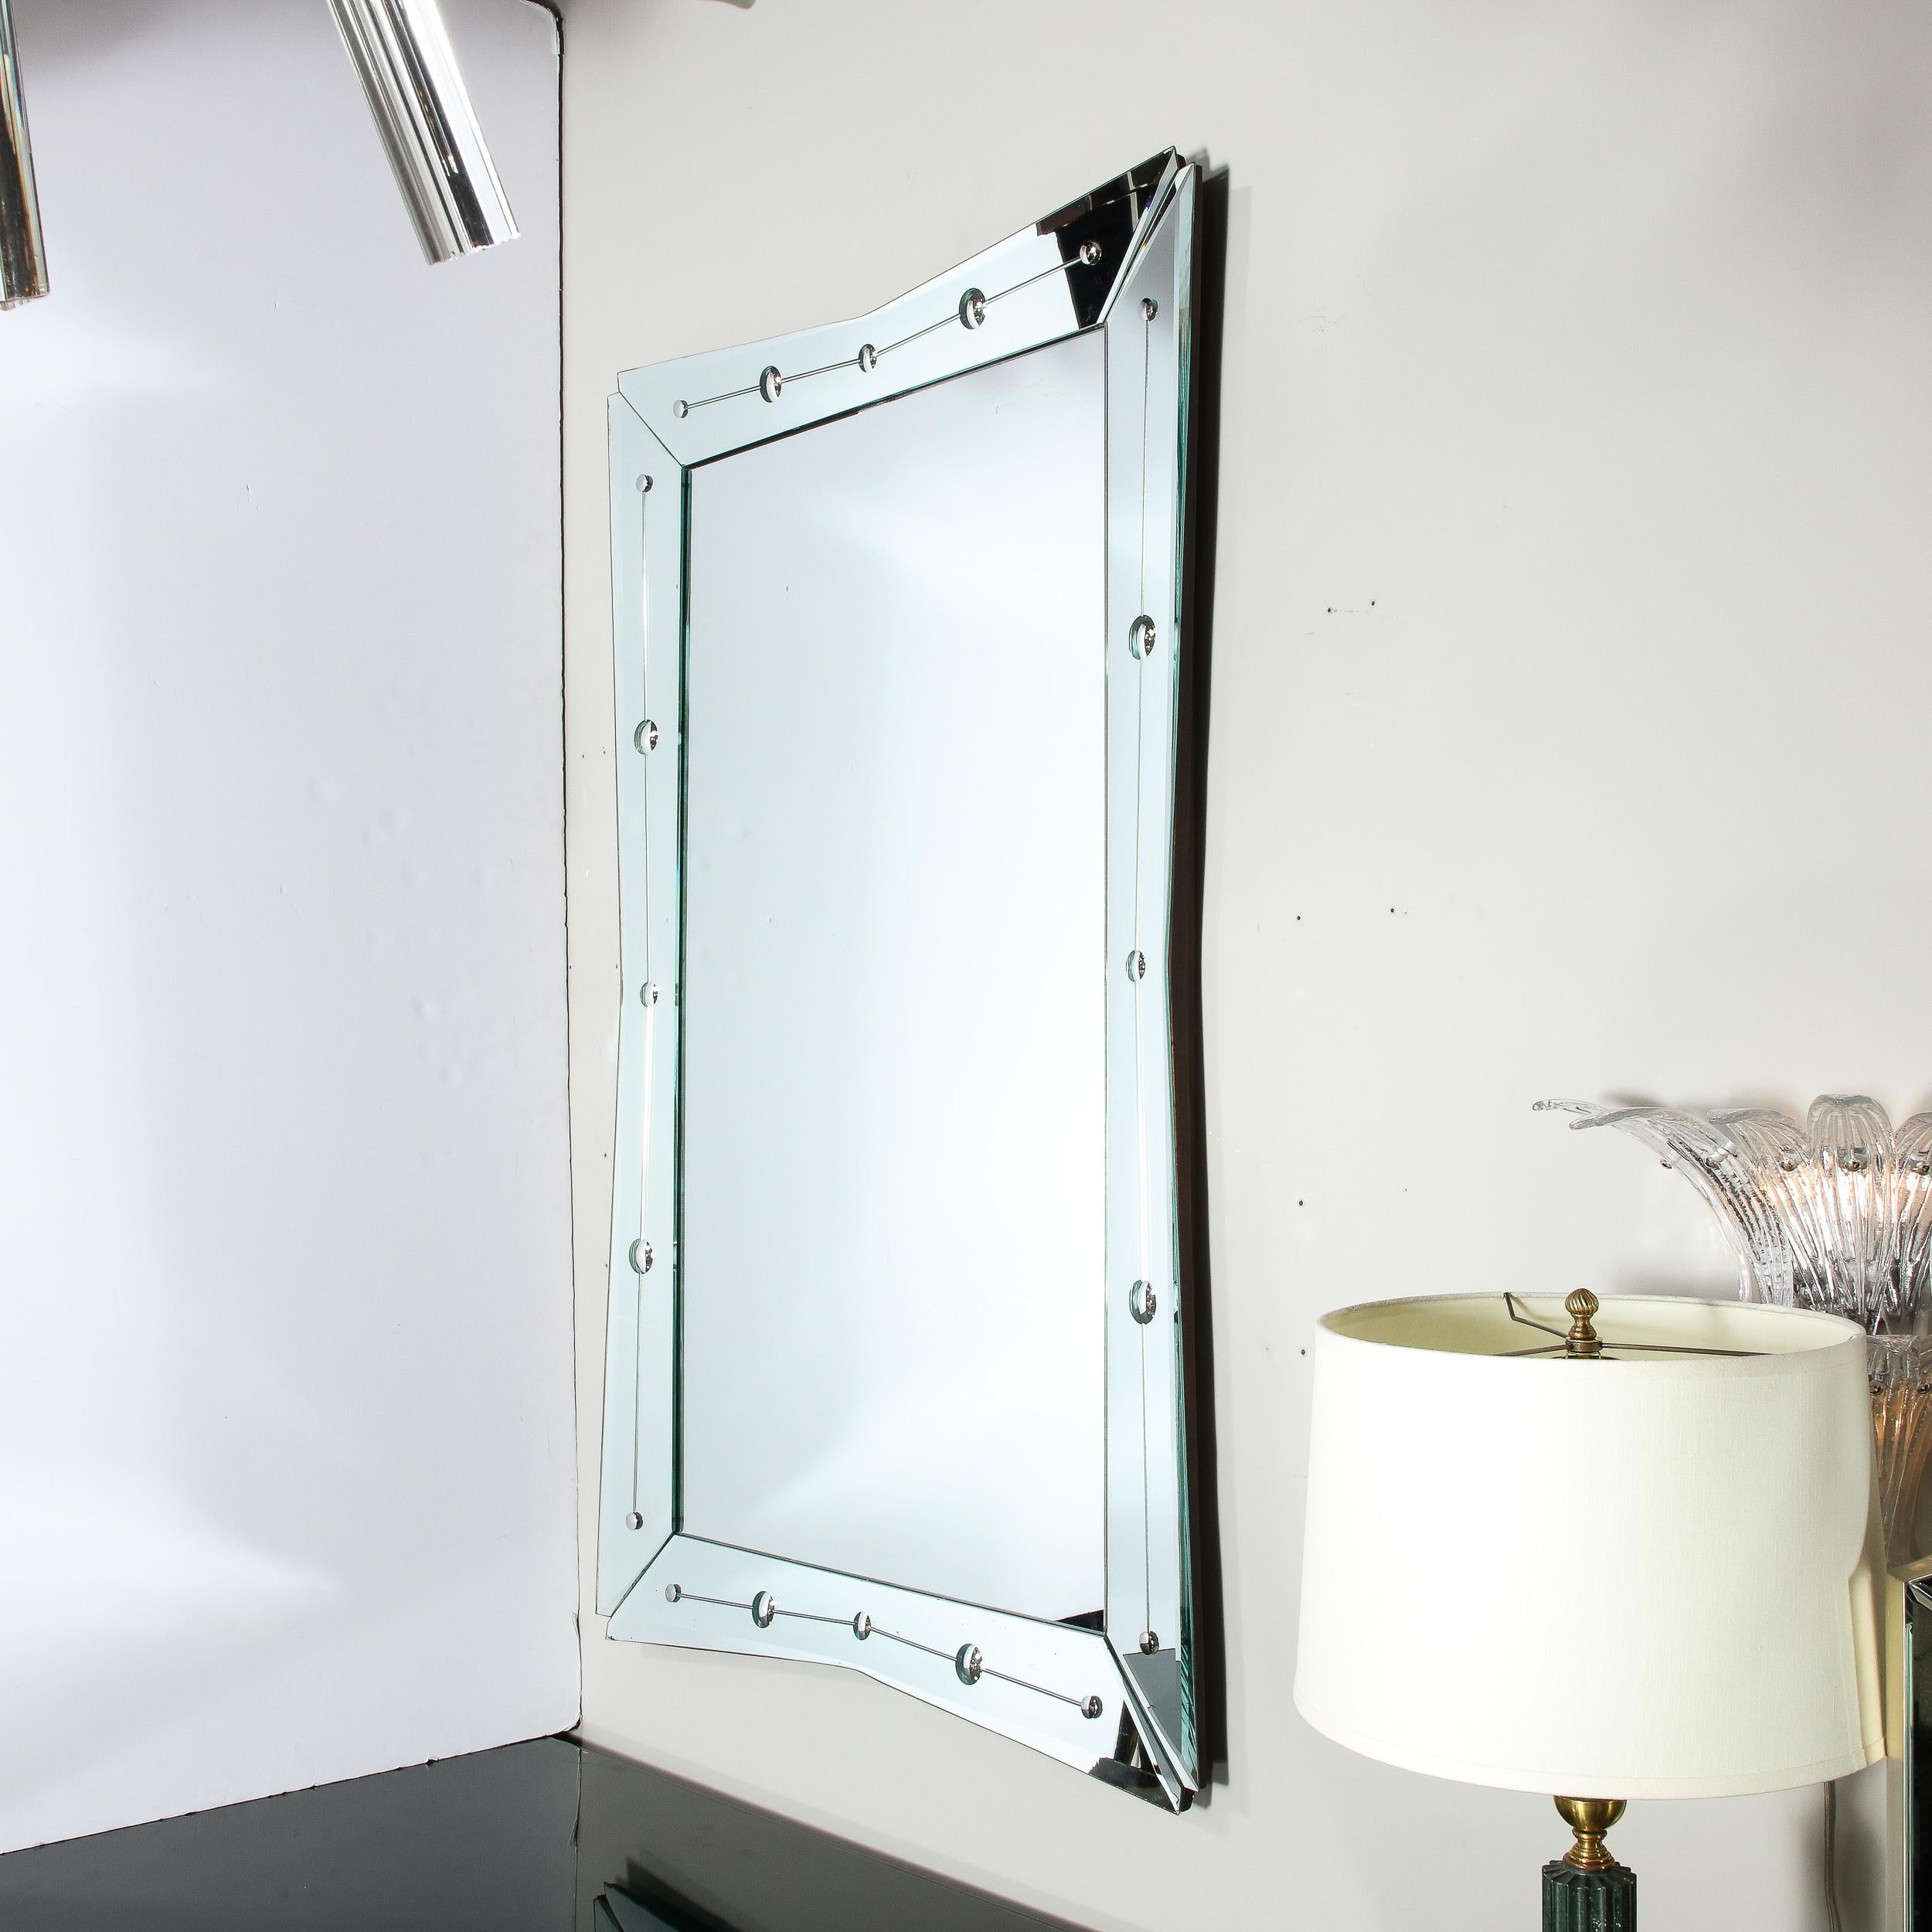 This stunning Art Deco Hollywood mirror was realized in the United States circa 1945. It features an atomic silhouette with four rhombus form mirrored segments adjoined around a rectangular mirrored panel. The perimeter segments taper in the center